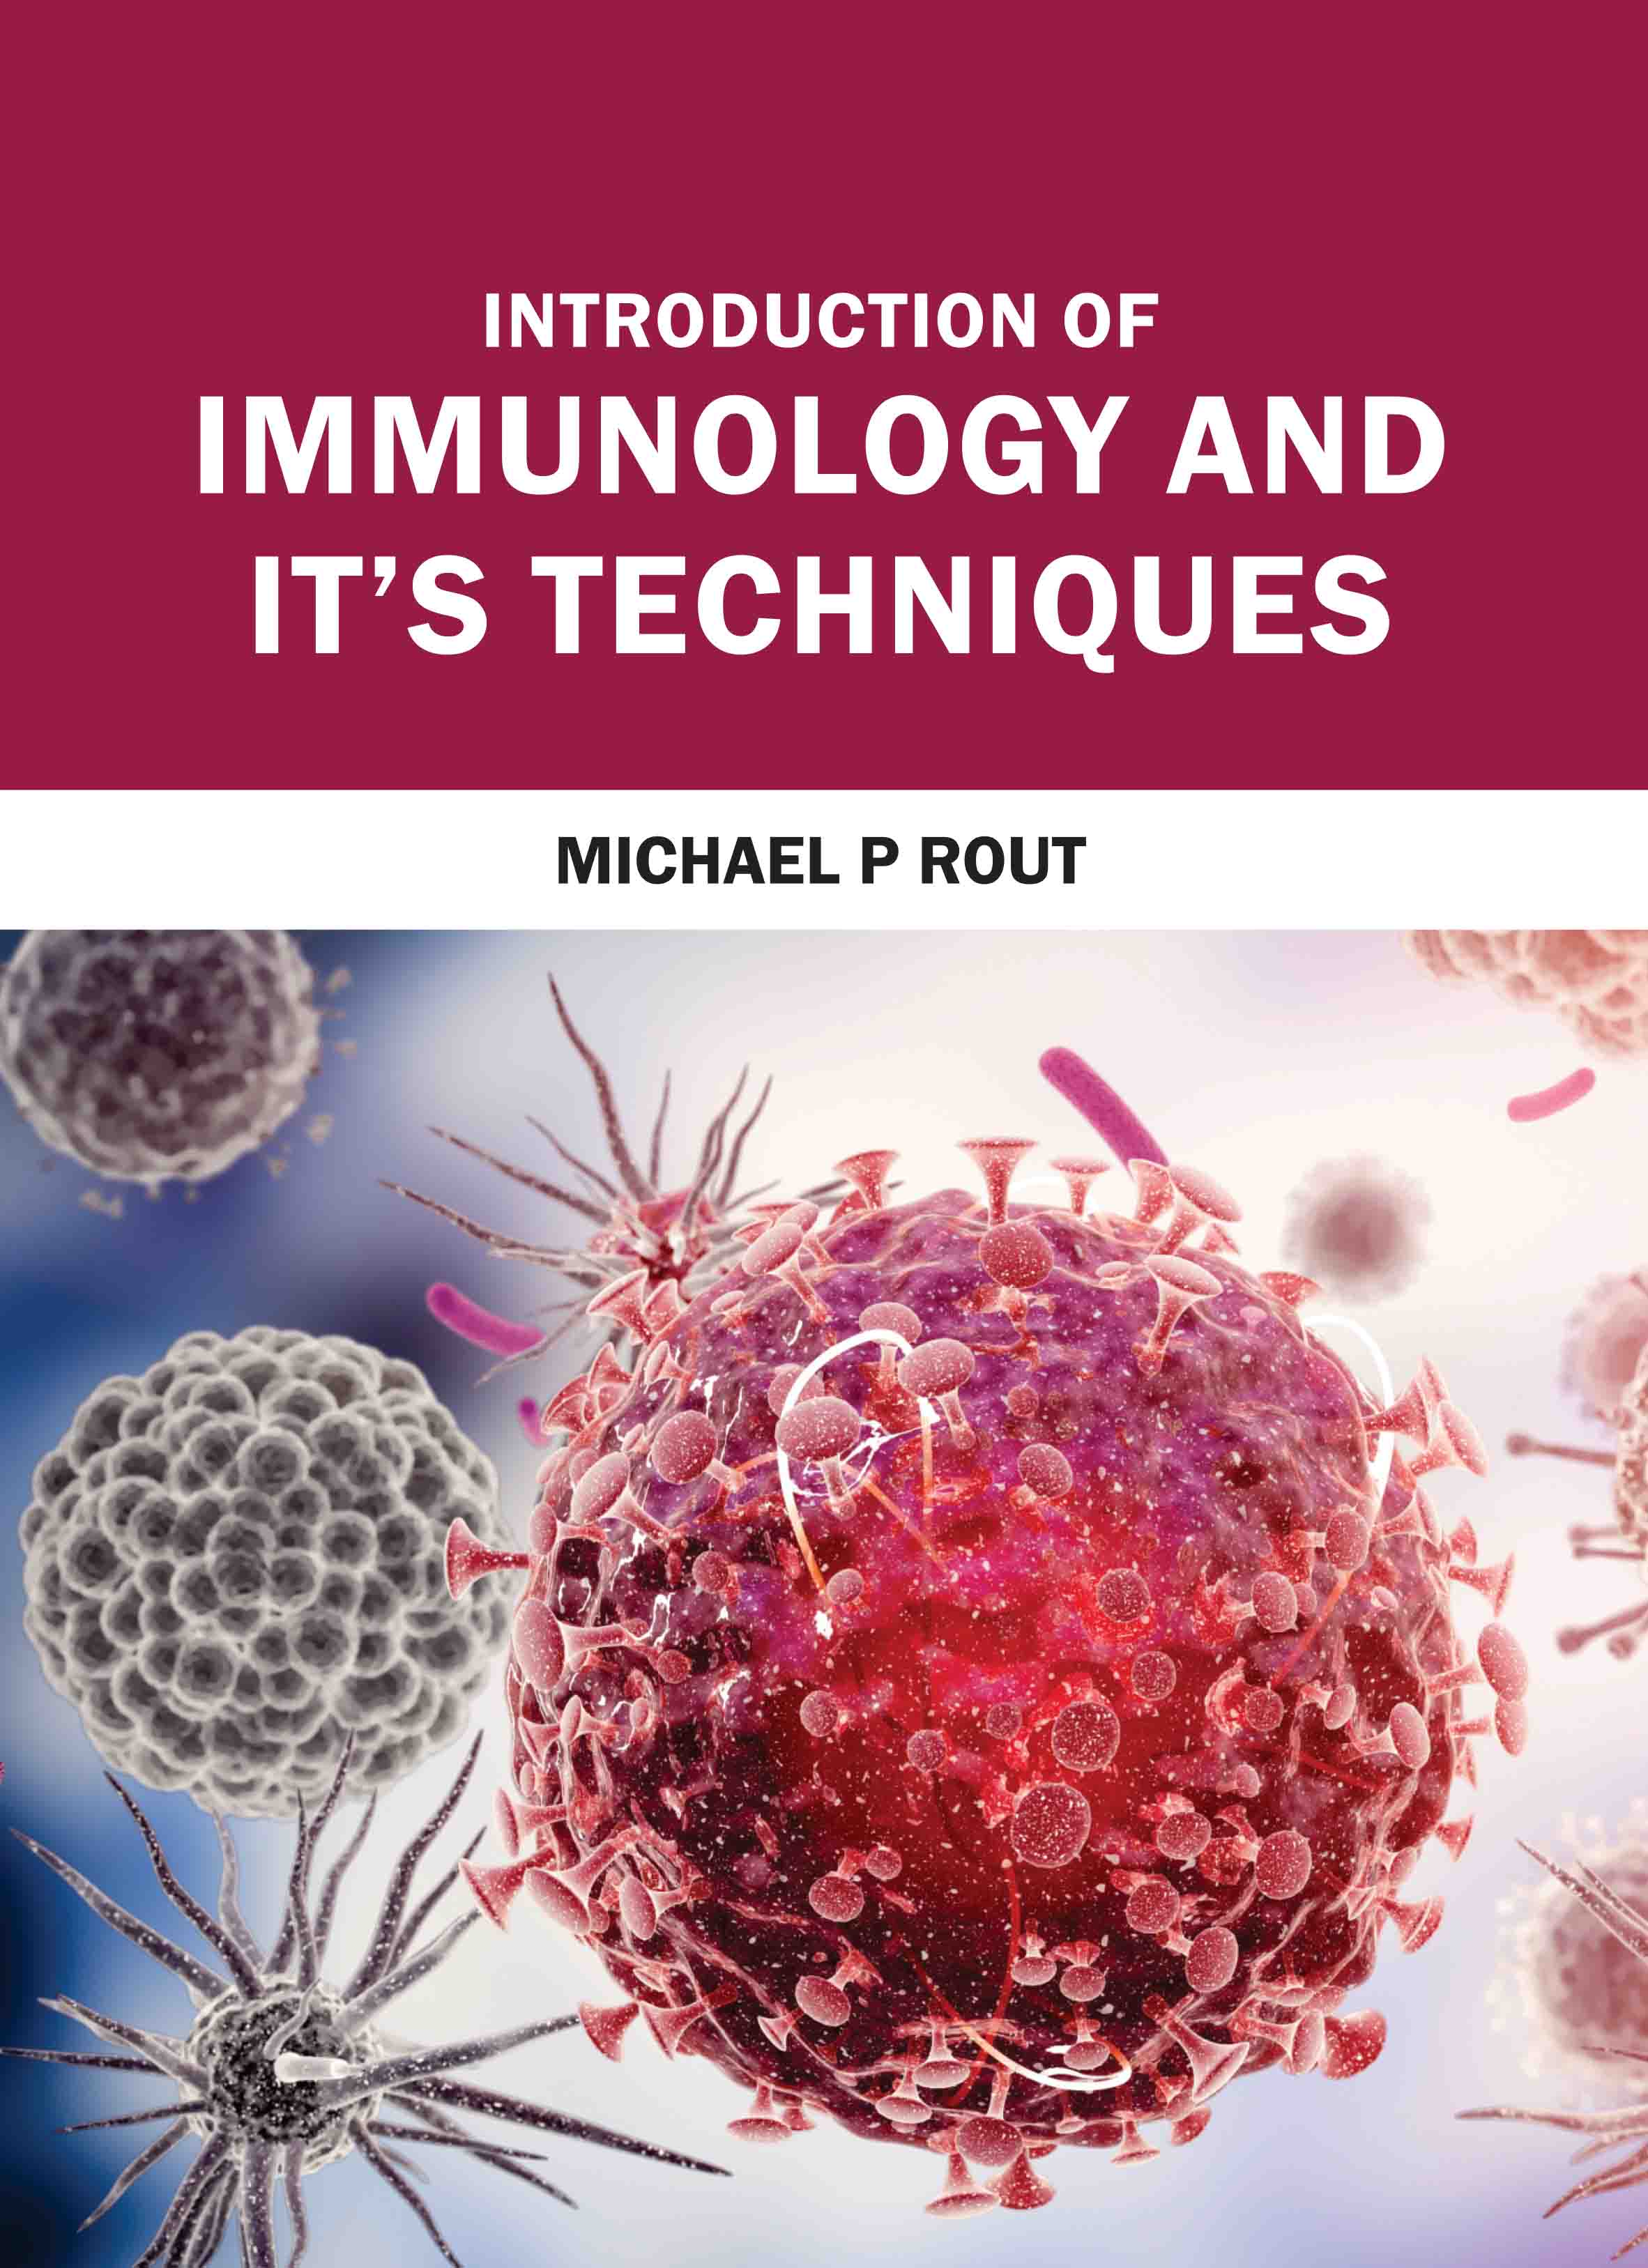 Introduction of Immunology and ItÃ¢â‚¬â„¢s Techniques